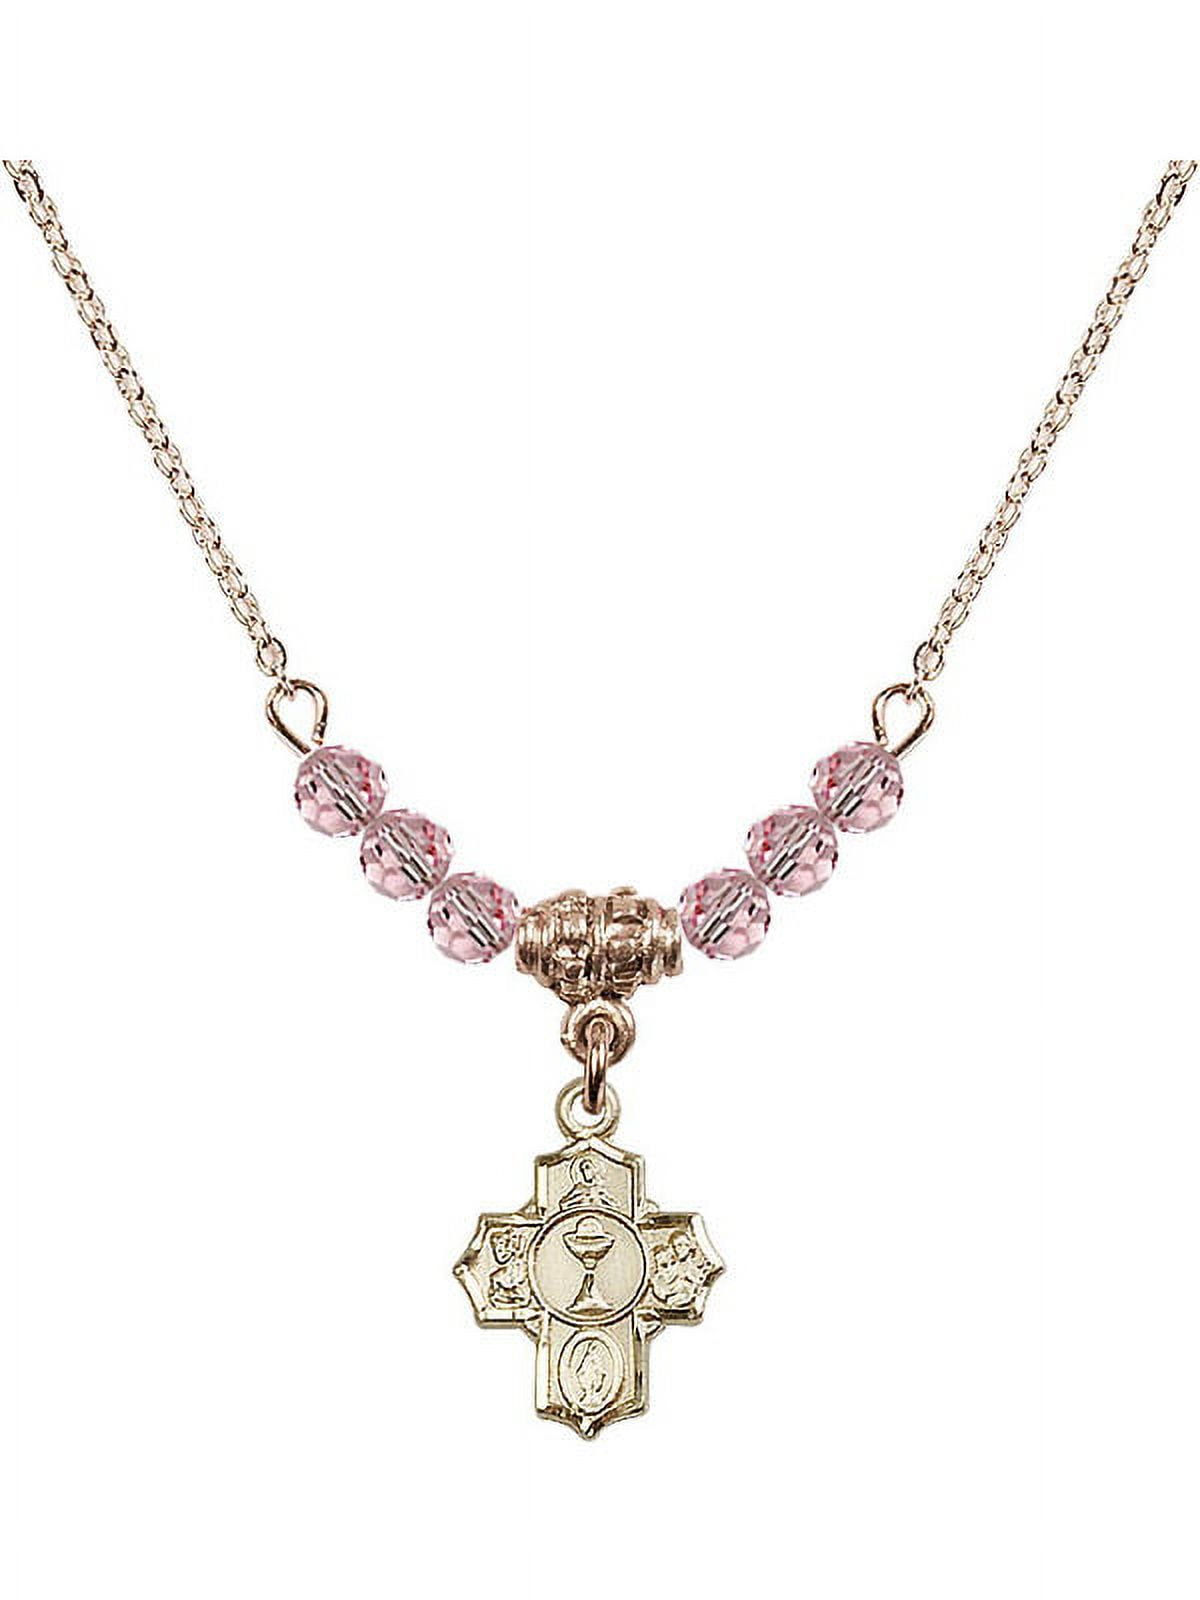 18-Inch Hamilton Gold Plated Necklace with 4mm Light Rose Pink